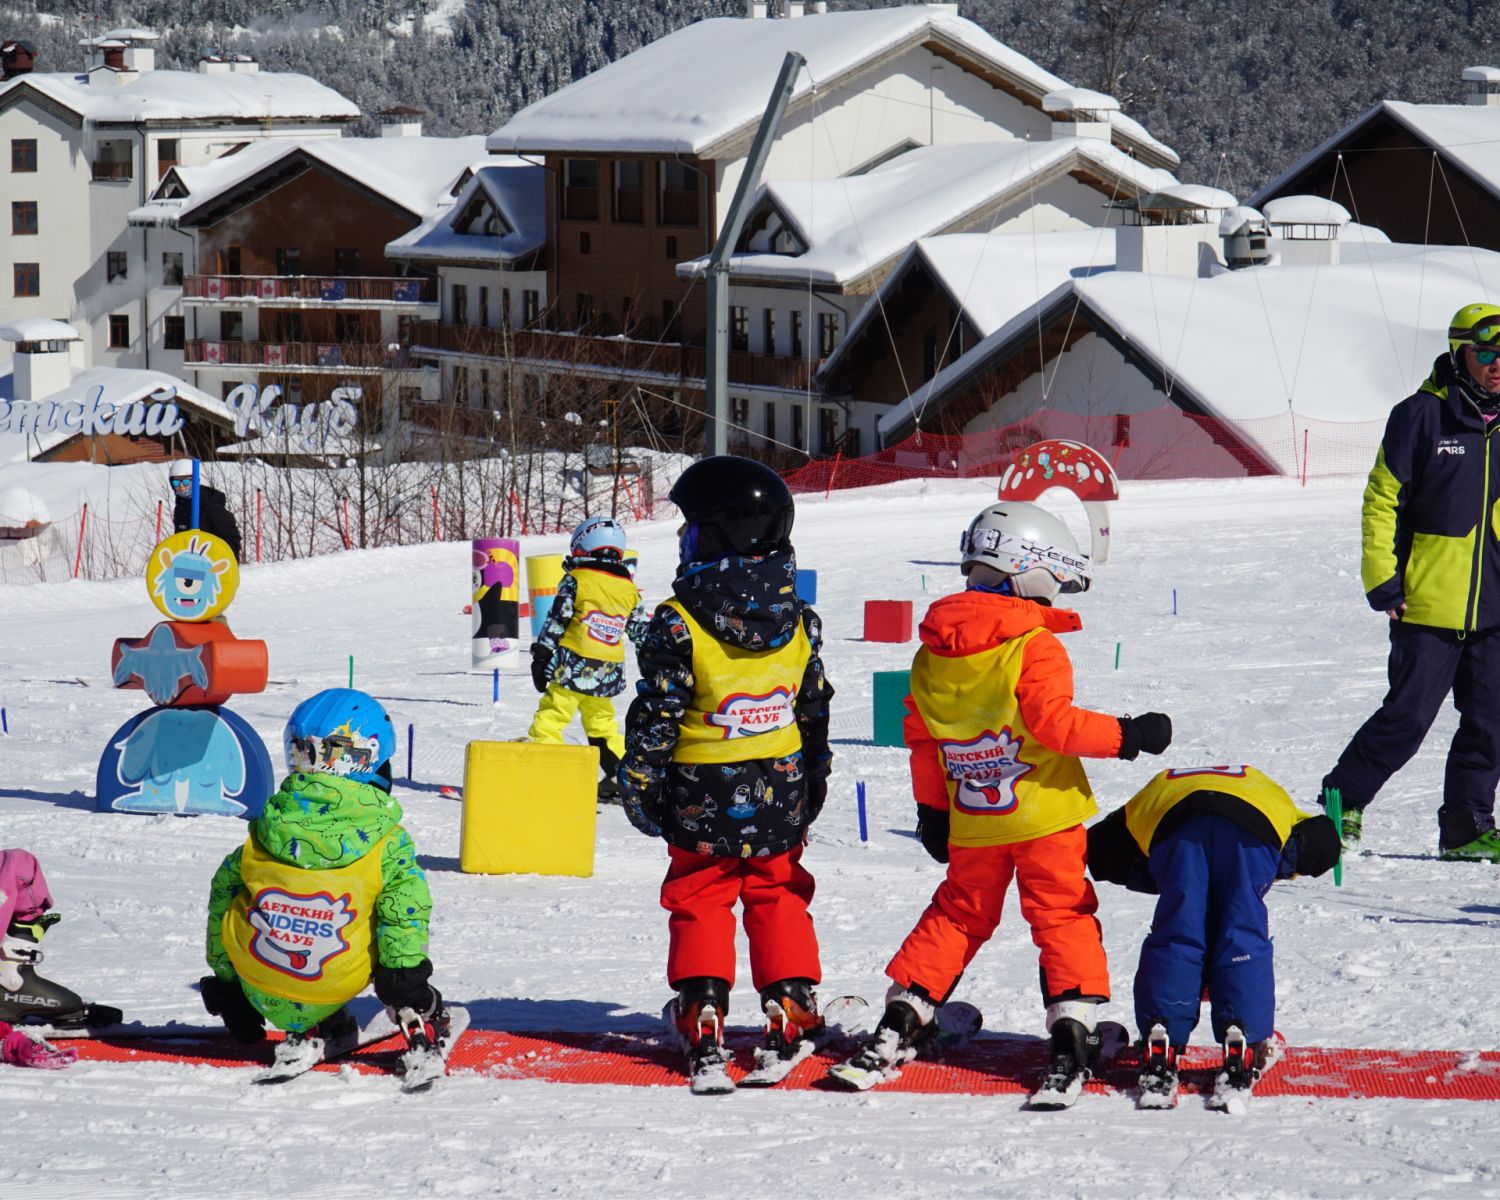 SKI COURSES FOR SCHOOLS DIRECTLY UNDER THE COTTAGE